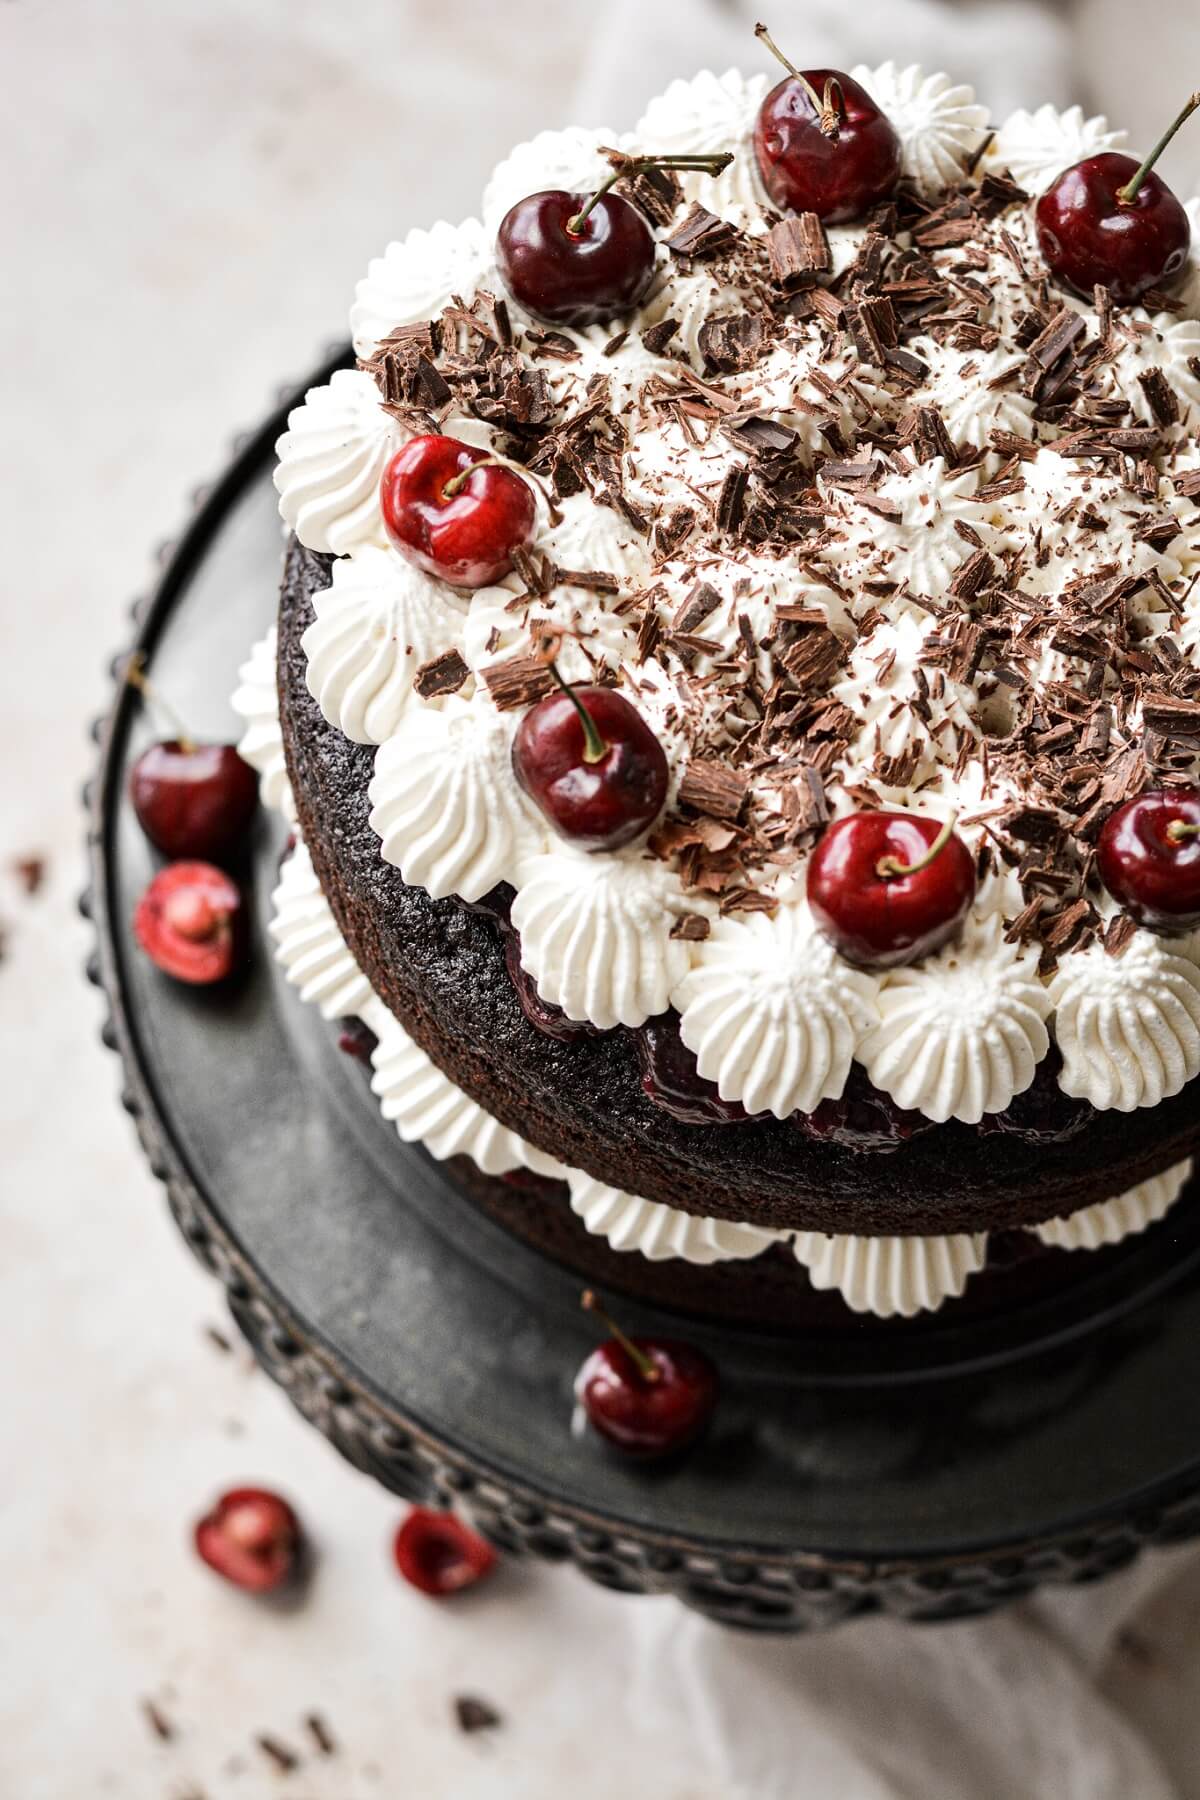 Black forest cake with layers of chocolate cake, cherries, whipped cream and chocolate shavings.